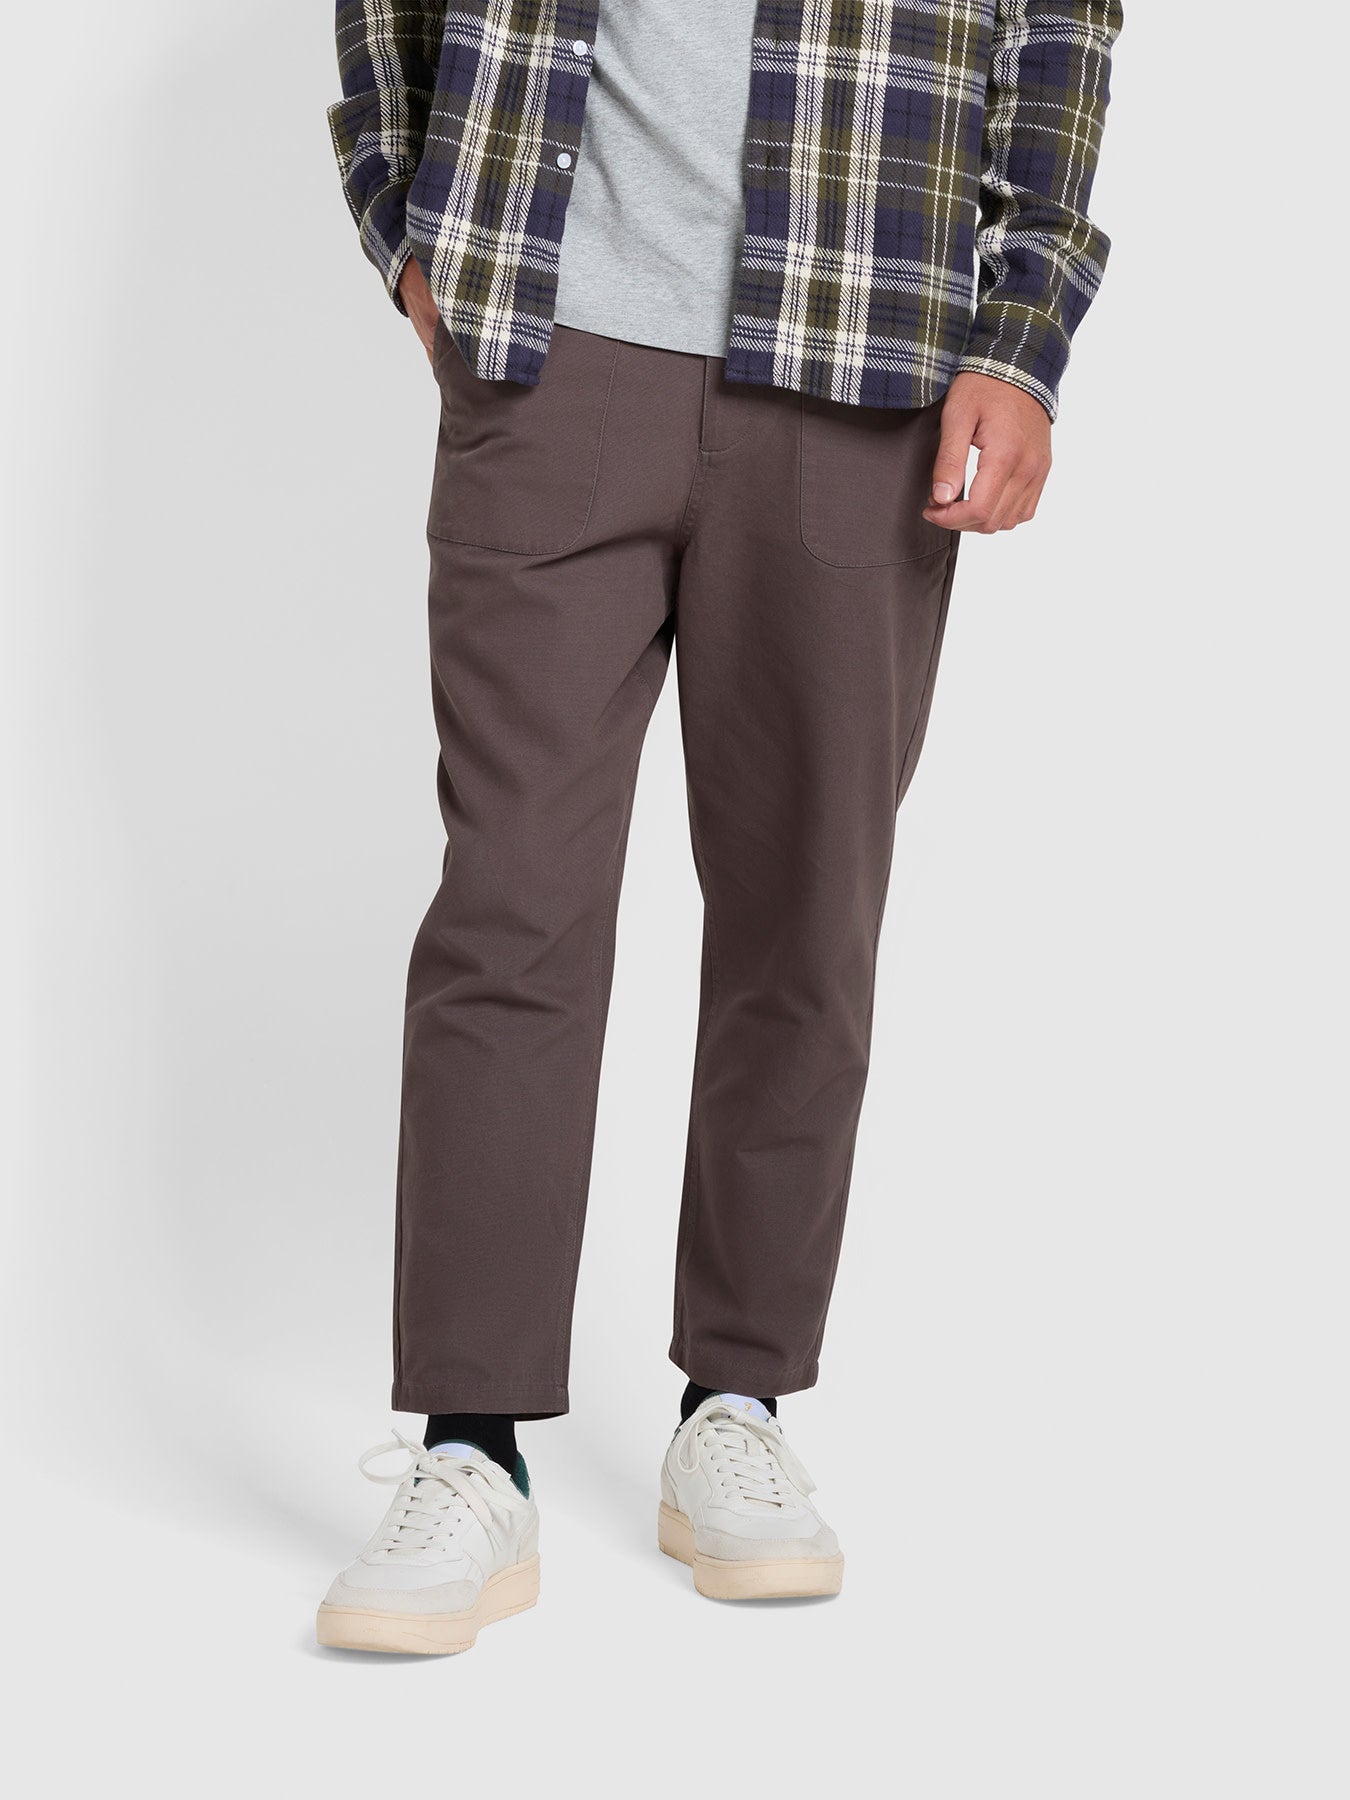 View Hawtin Relaxed Fit Canvas Trousers In Farah Grey information